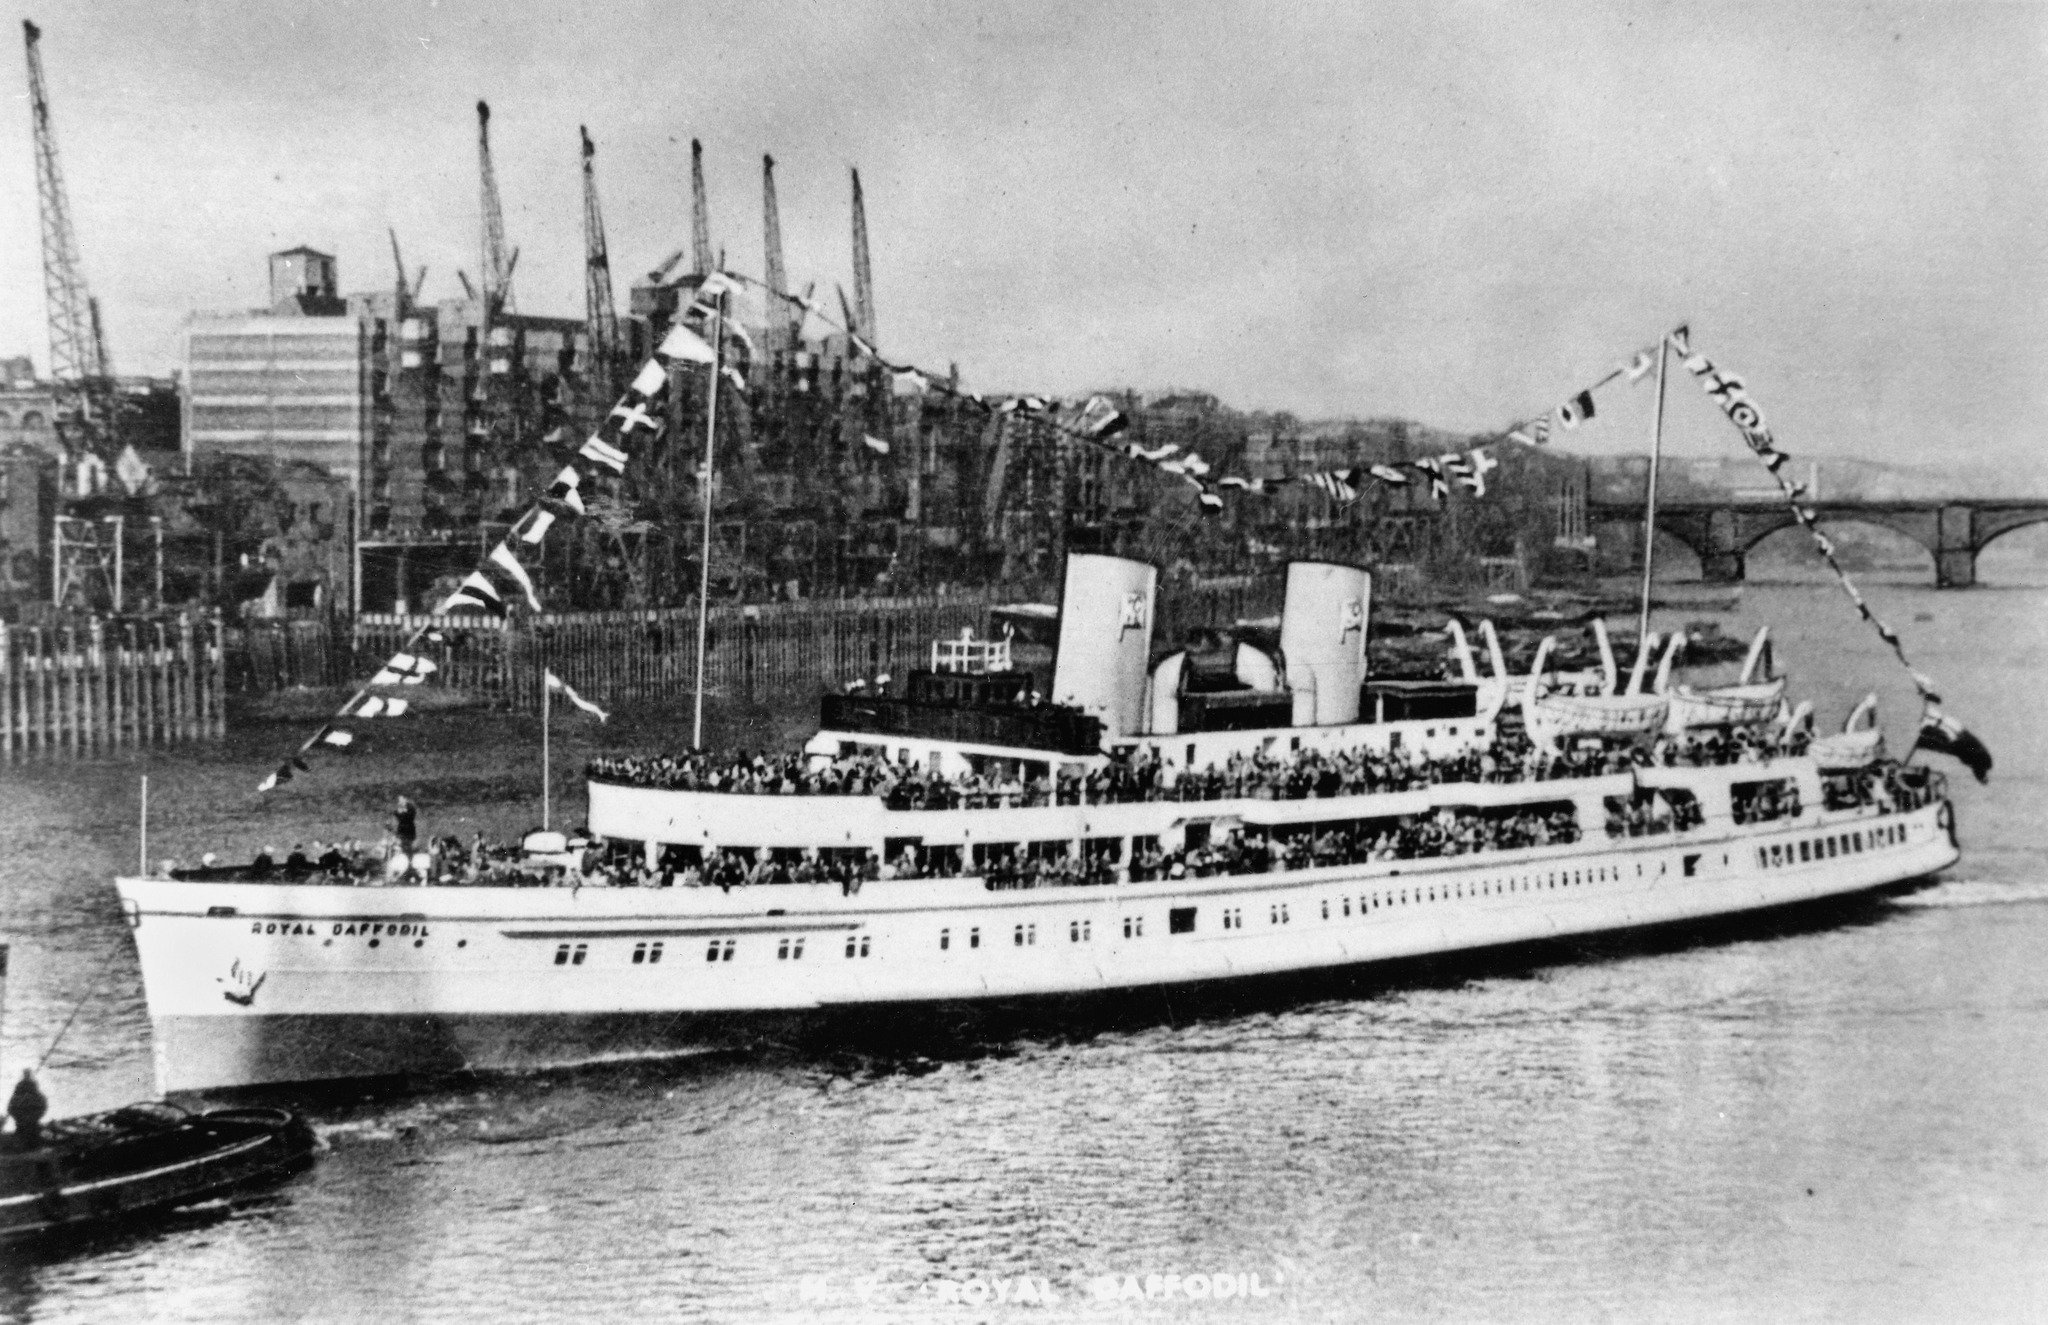 The Royal Daffodil commenced her service on this day in 1939. She was the third ship to carry that name. She was one of the many ships that took part in Operation Dynamo, the Dunkirk evacuation in 1940. She rescued 9,500 men in seven trips. M.V. Roya